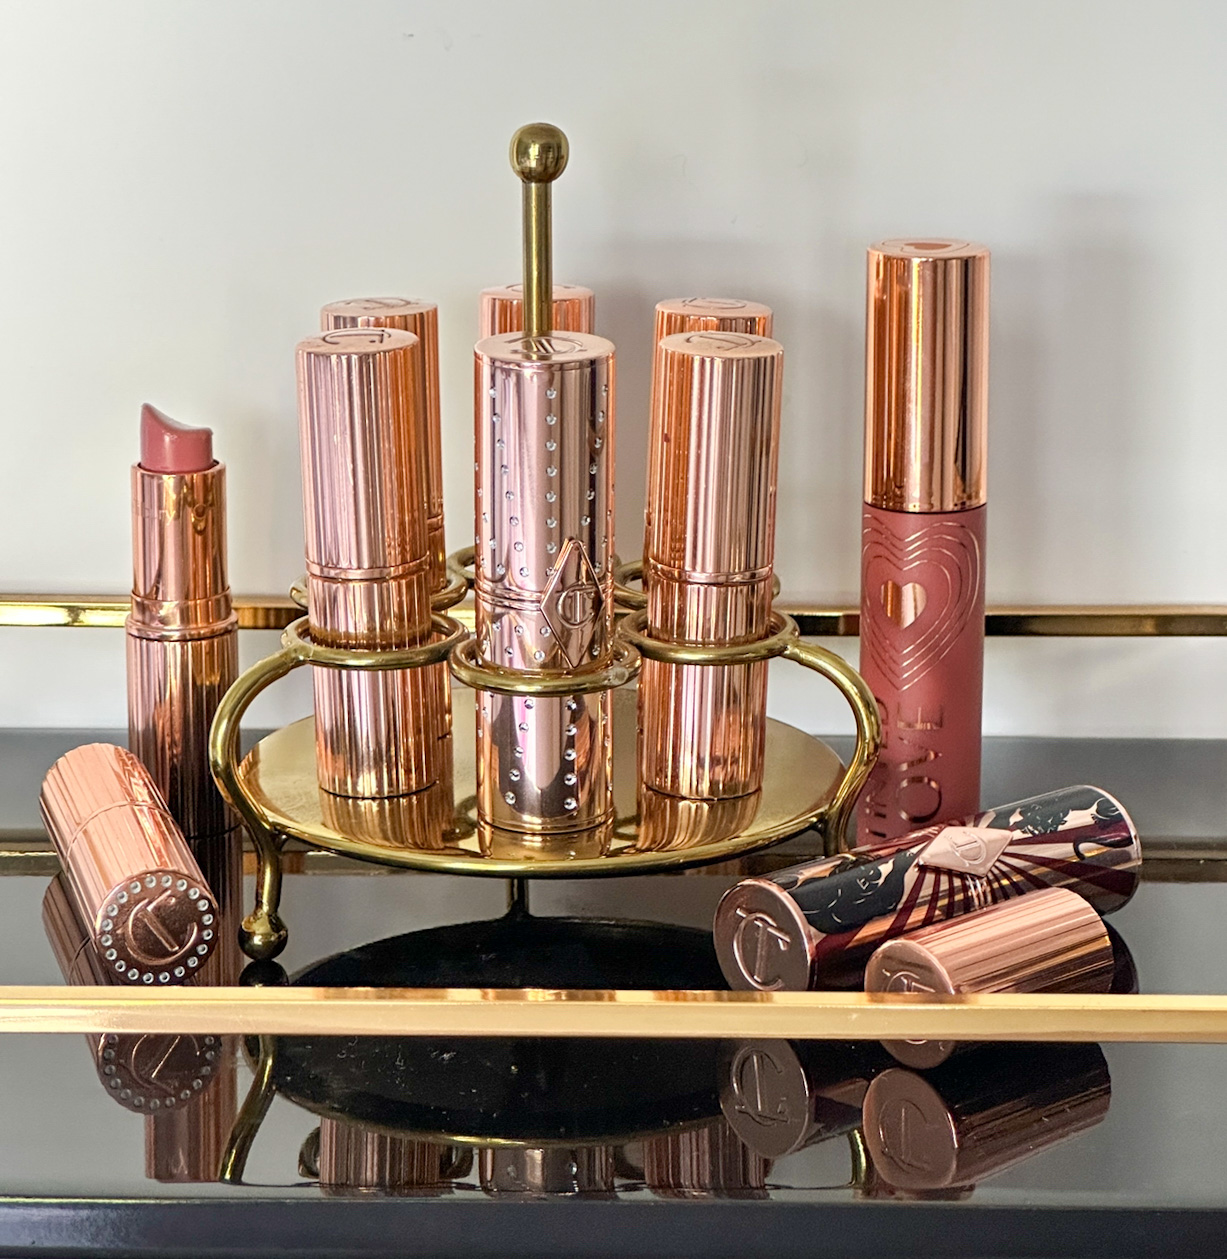 My top 10 Charlotte Tilbury nude lipsticks (with swatches).